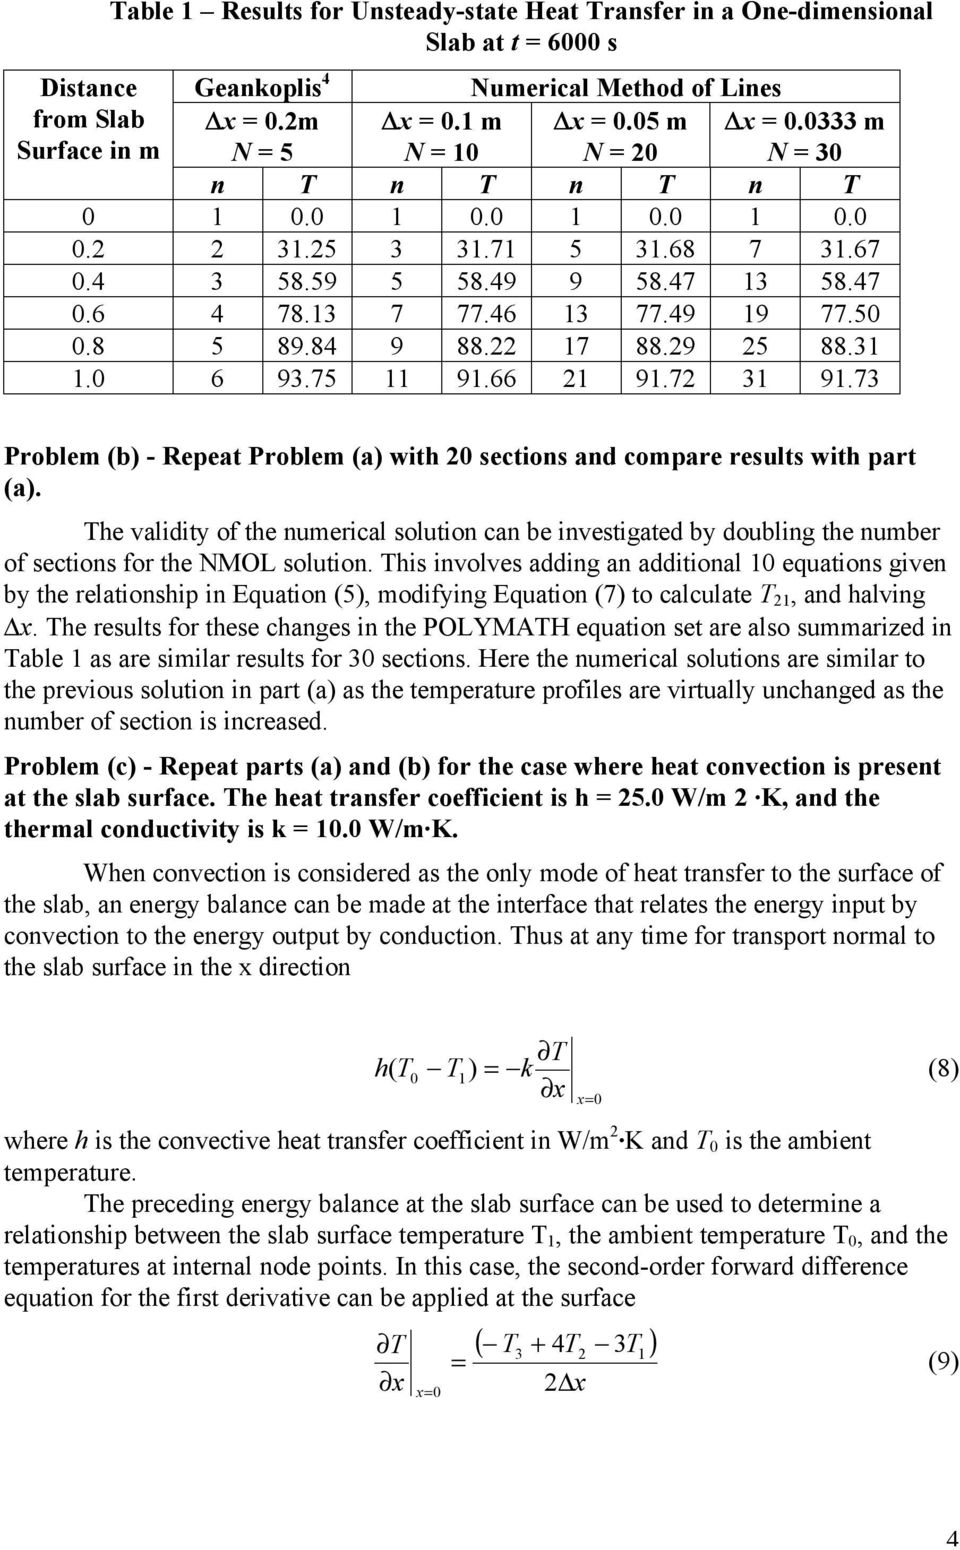 17 88.9 5 88.31 1.0 6 93.75 11 91.66 1 91.7 31 91.73 Problem (b) - Repeat Problem (a) with 0 sections and compare results with part (a).